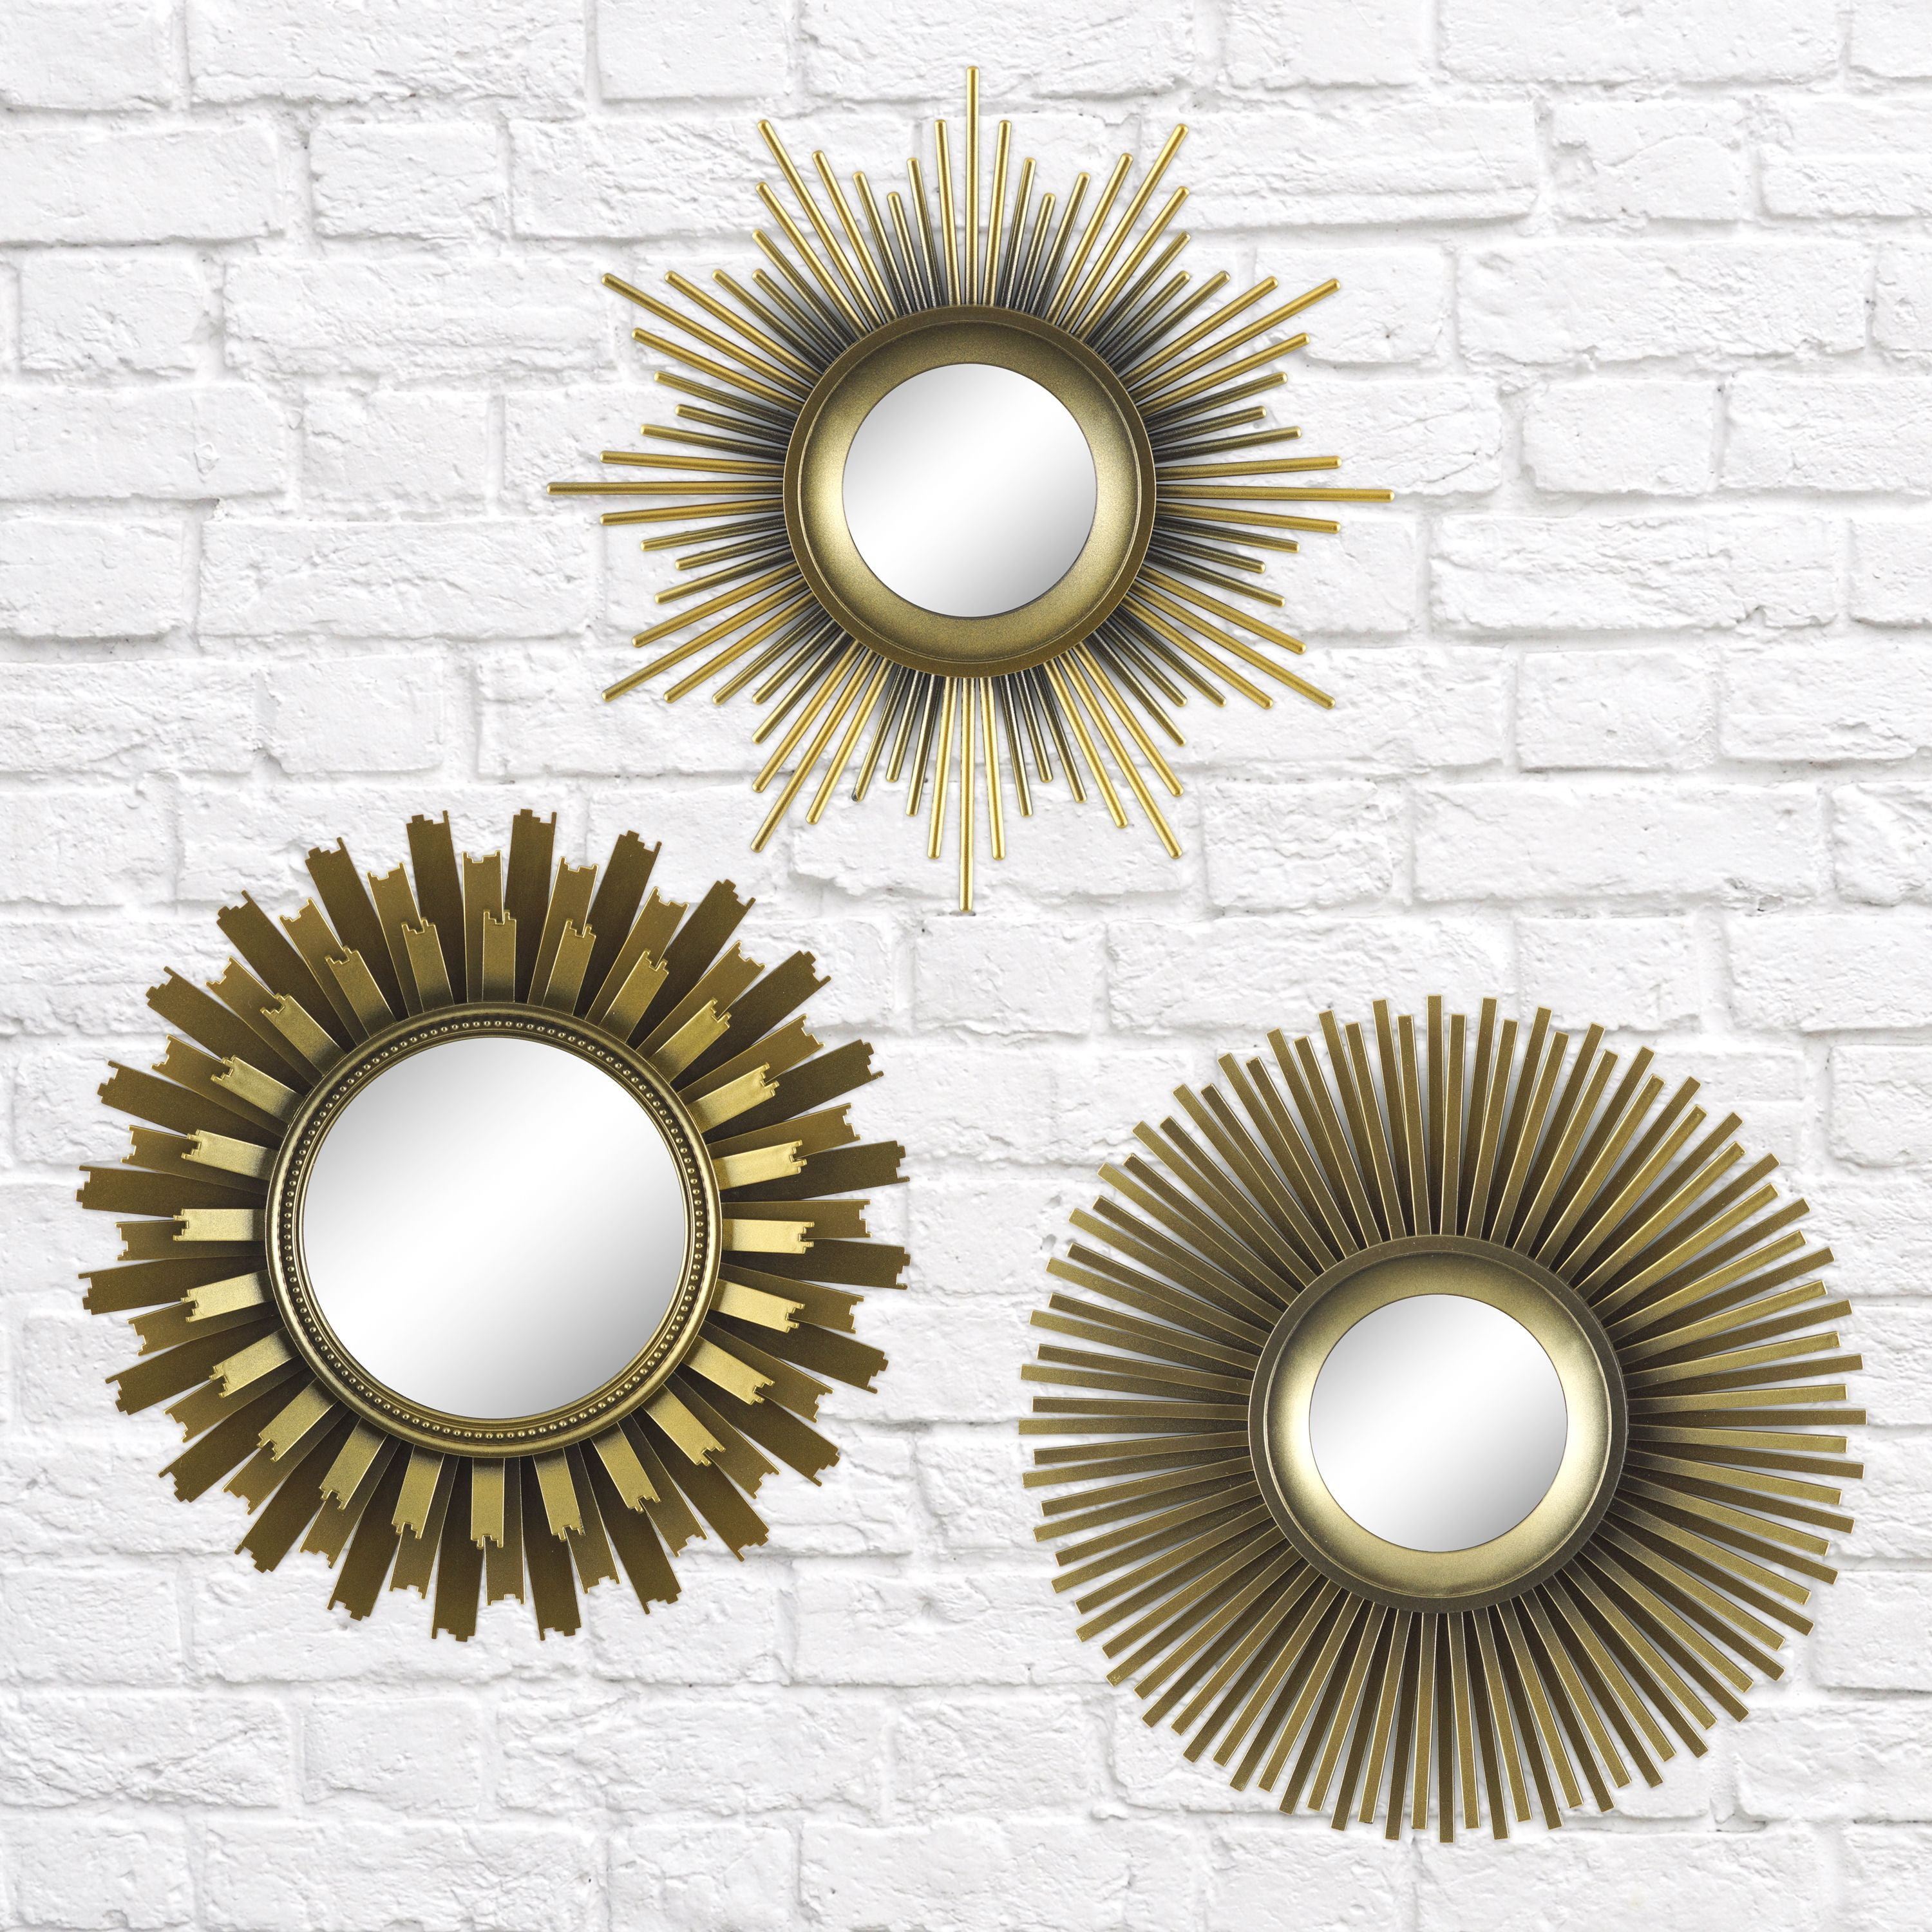 Lovely Gifts for Women and Mums Small Mirrors and Shabby Chic Style for Bedroom Living Room Dinning Room SILVER ADEPTNA Round Sunburst Wall Hanging Decorative Mirror set of 3